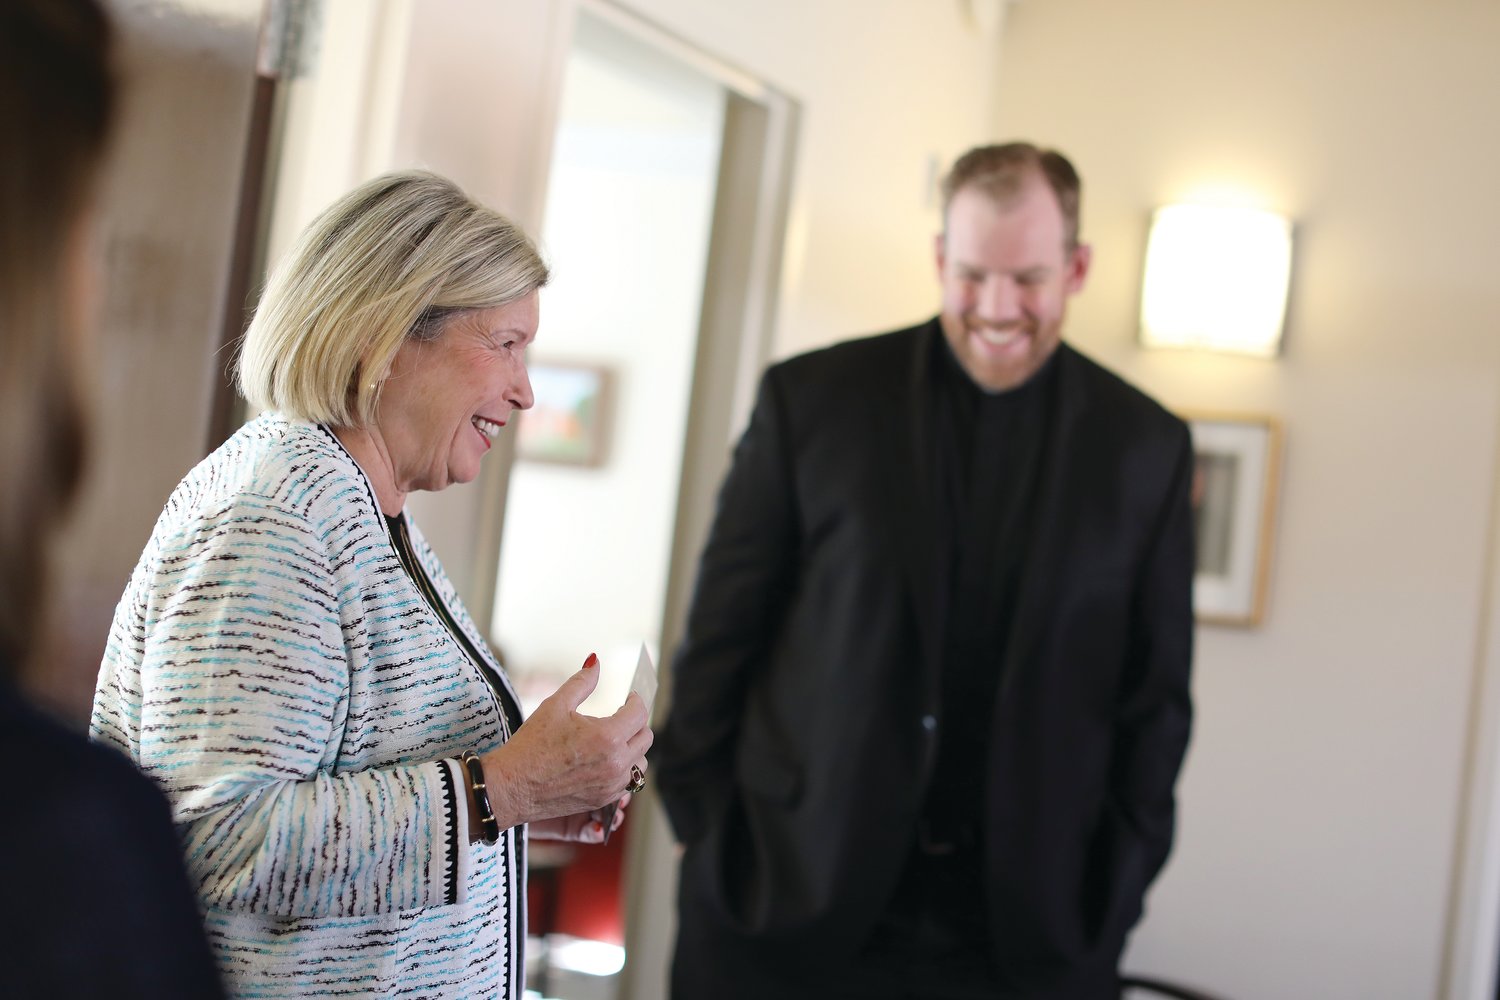 During a special tour of Our Lady of Providence Seminary, Barbara Papitto meets with Father Brian Morris, director of vocations, pictured, and Father Christopher Murphy, rector. Papitto has established a $1 million endowment grant with the Catholic Foundation of Rhode Island to support priestly formation.